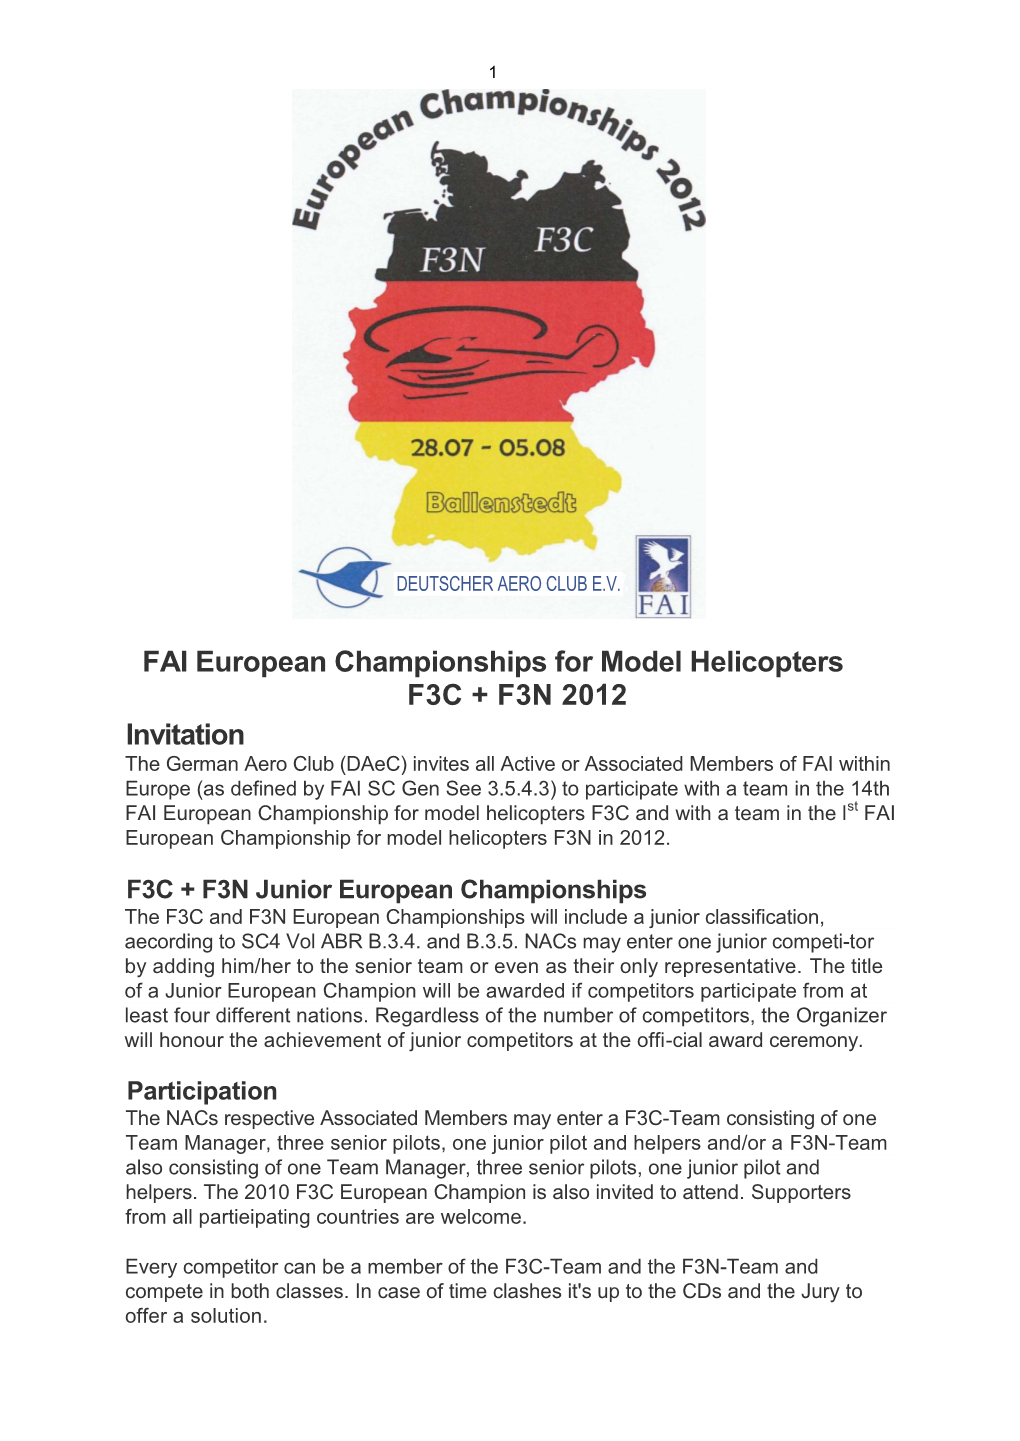 FAI European Championships for Model Helicopters F3C + F3N 2012